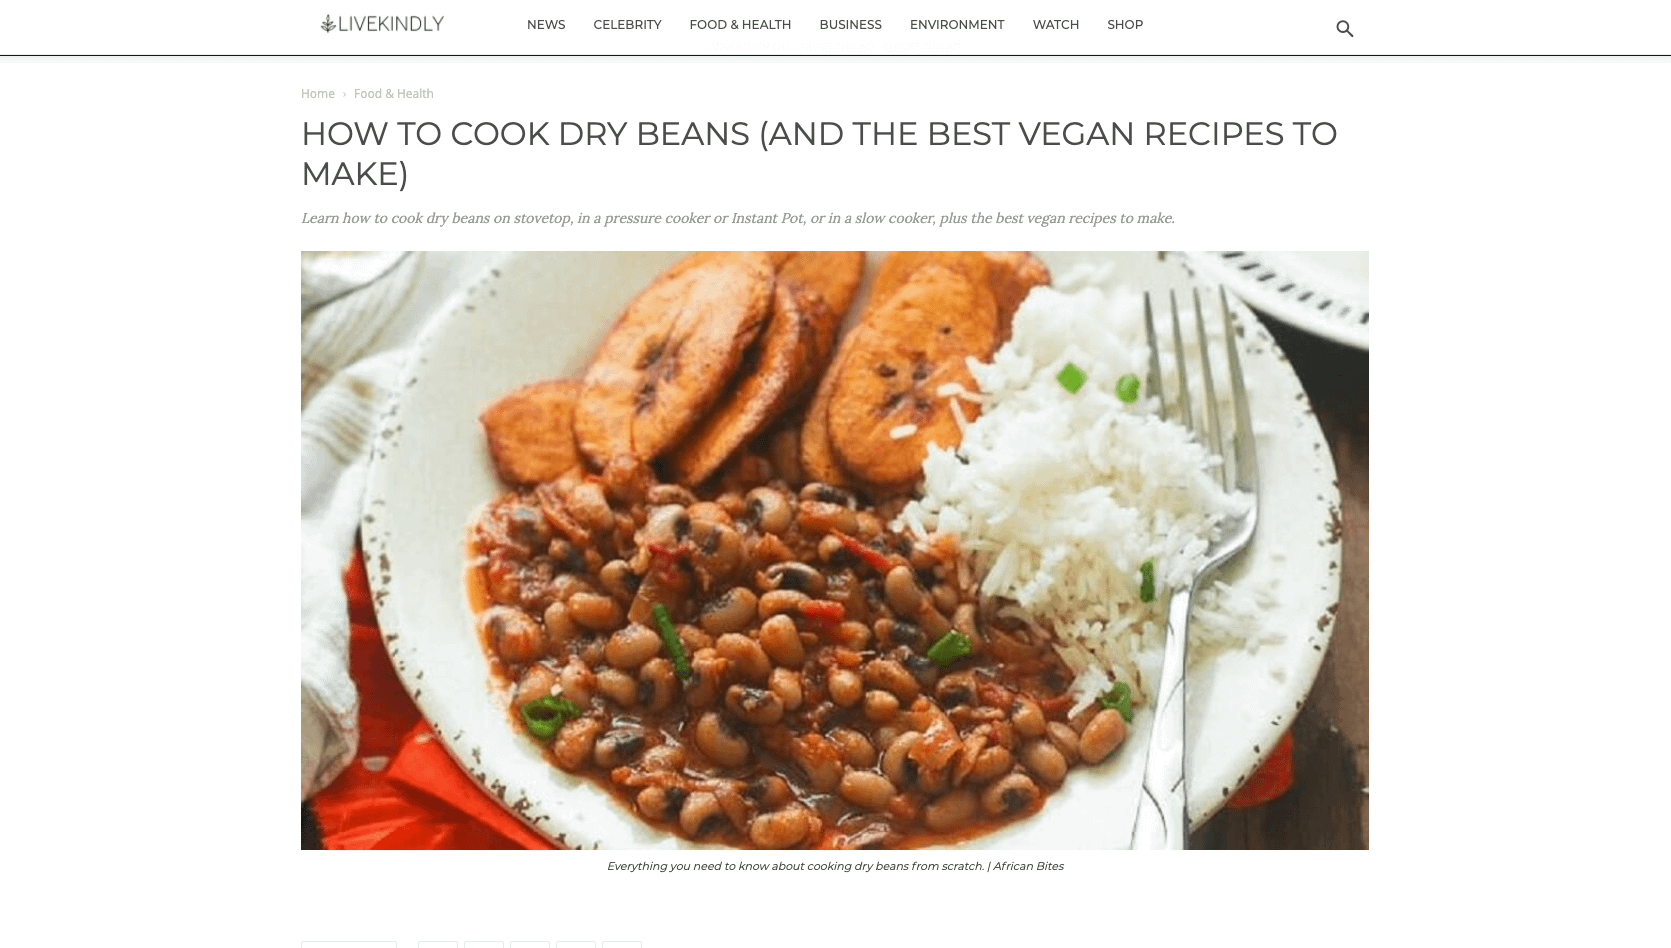 When going vegan you have to master the art of cooking beans!